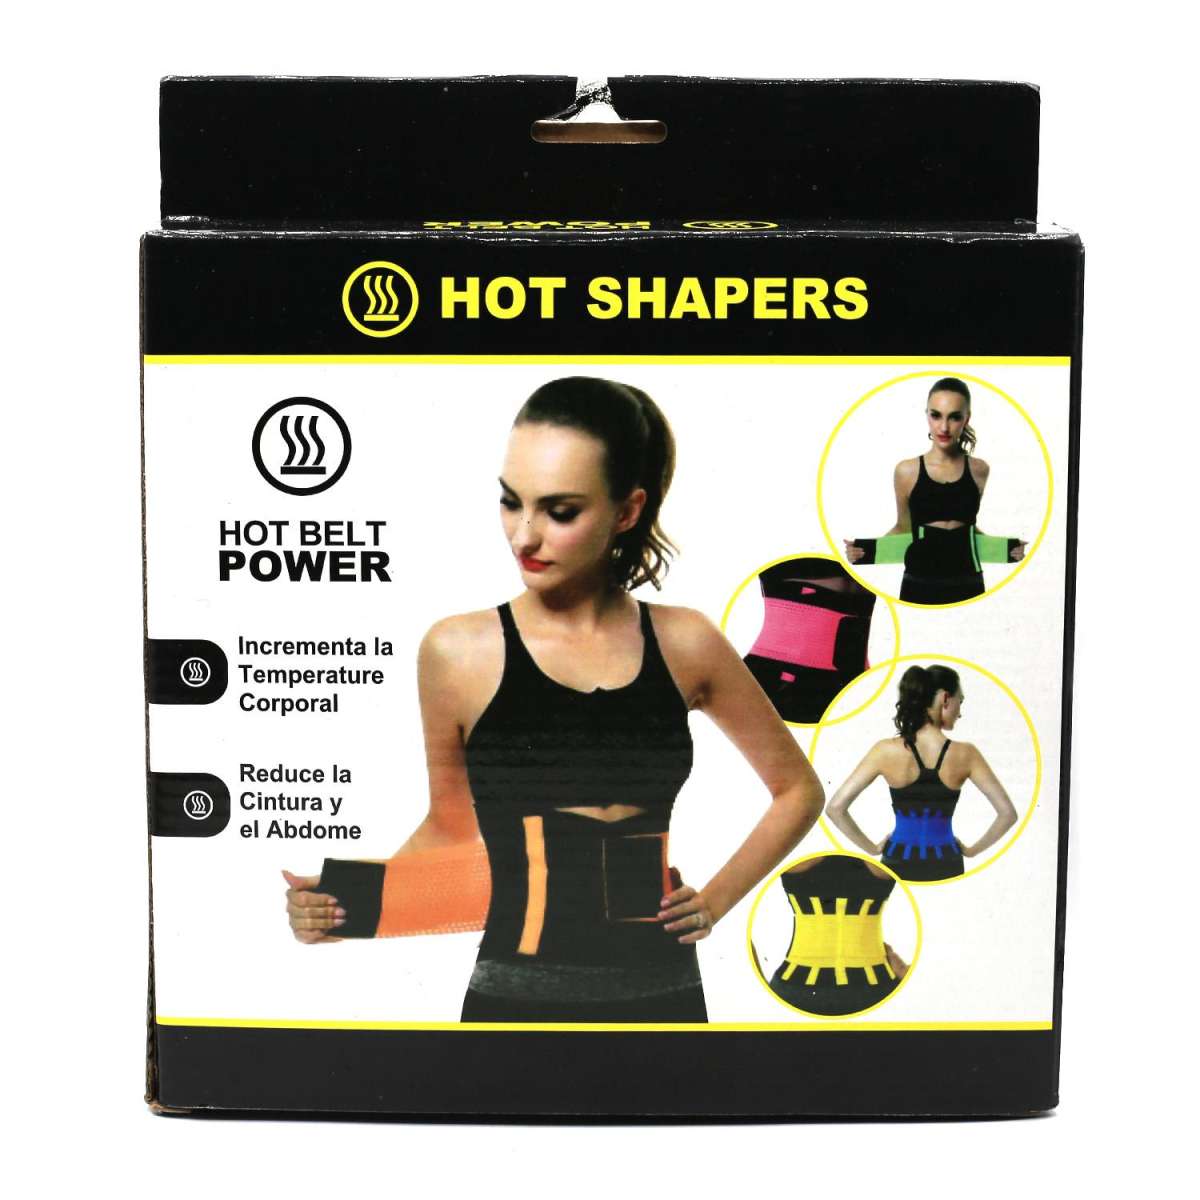 Nayanaulo.com - Hot Shaper Belt Rs 1000/- Neotex Black Hot Shapers Slimming  Belt Slim Belt that is specially designed with Prenotec technology that  increases core temperature helping your body sweat and helps